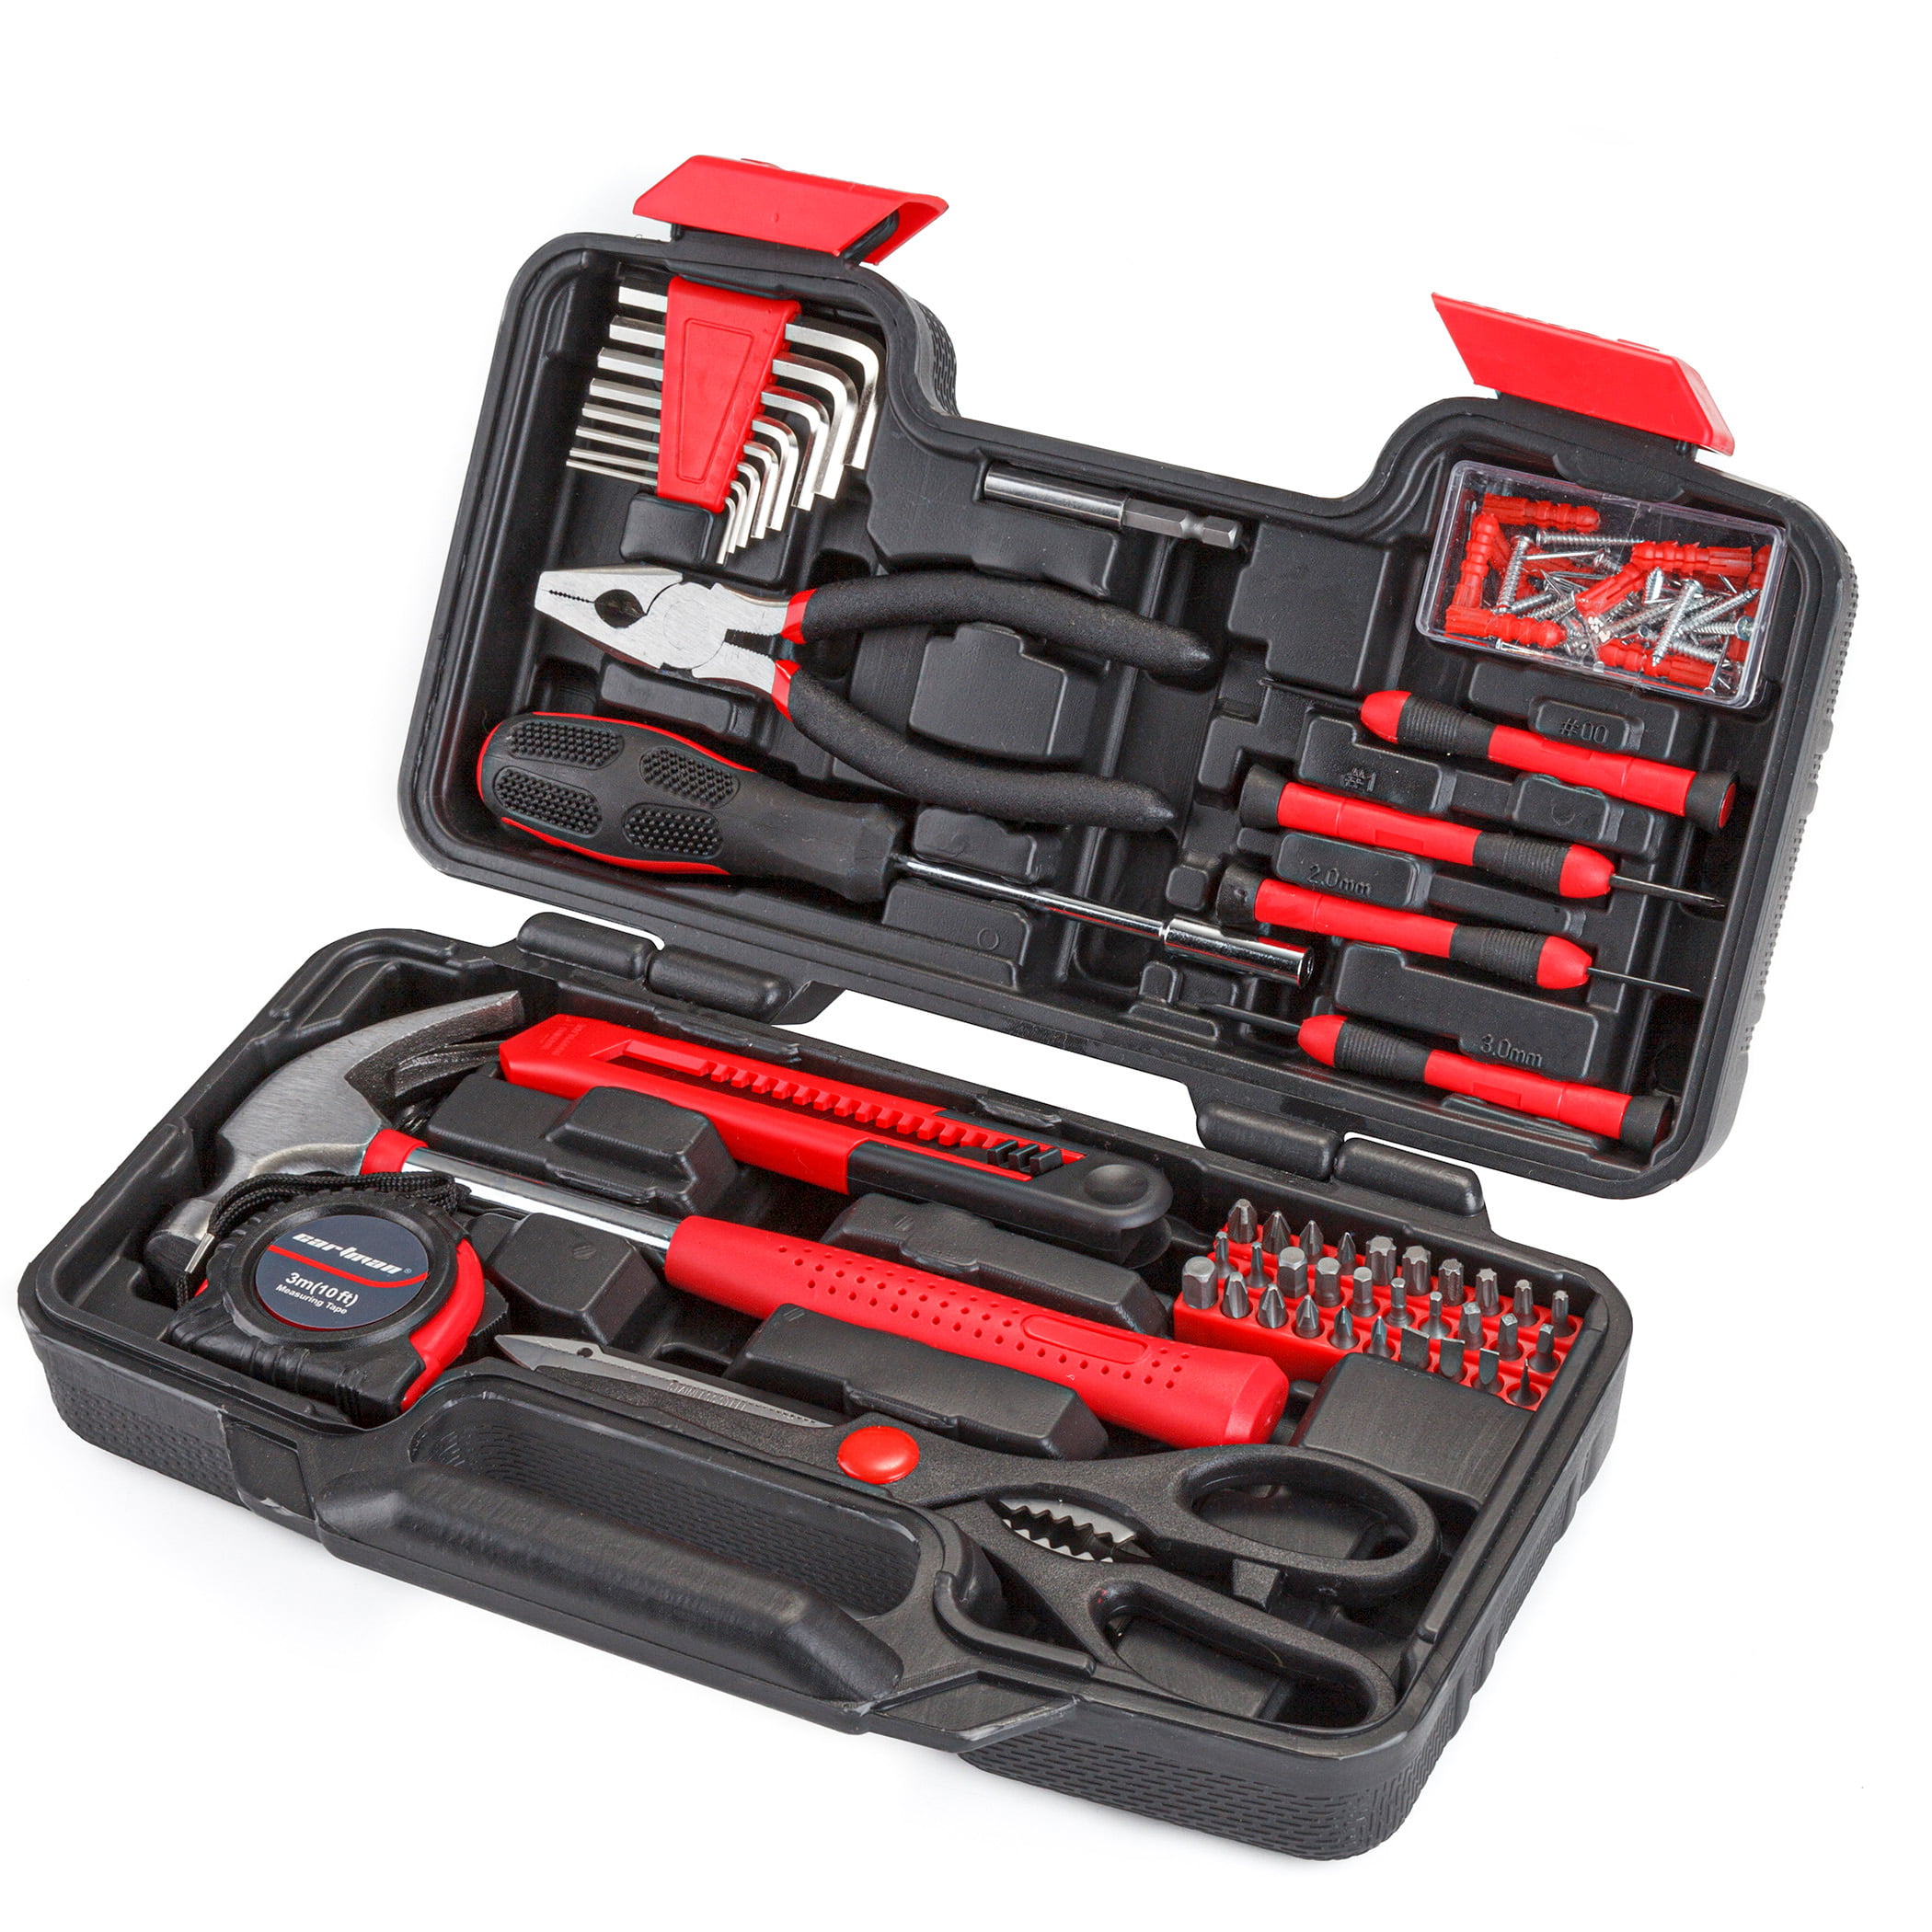 Cartman Red 126Piece Tool Set General Household Hand Tool Kit with Plastic Toolbox Storage Case 